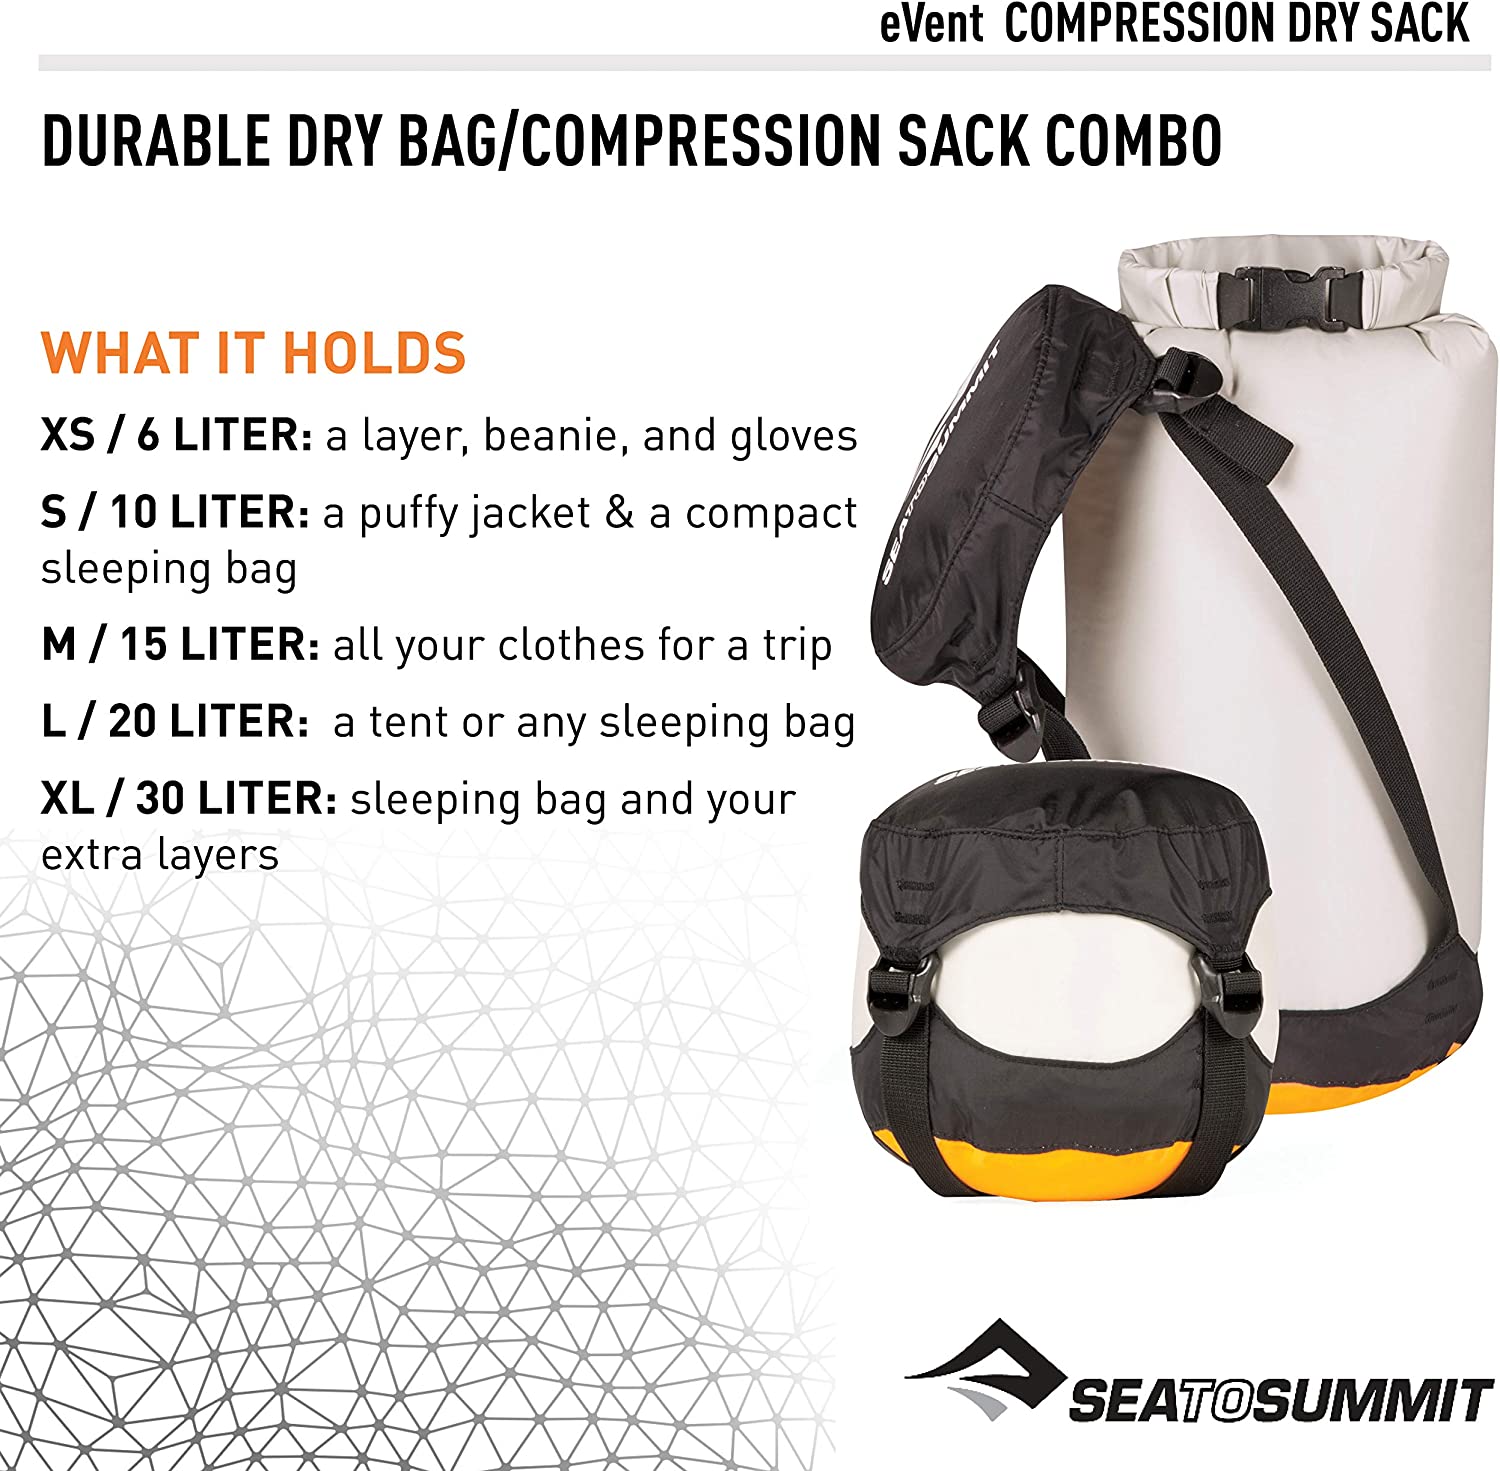 Sea to Summit eVent Compression Dry Sack - image 2 of 7